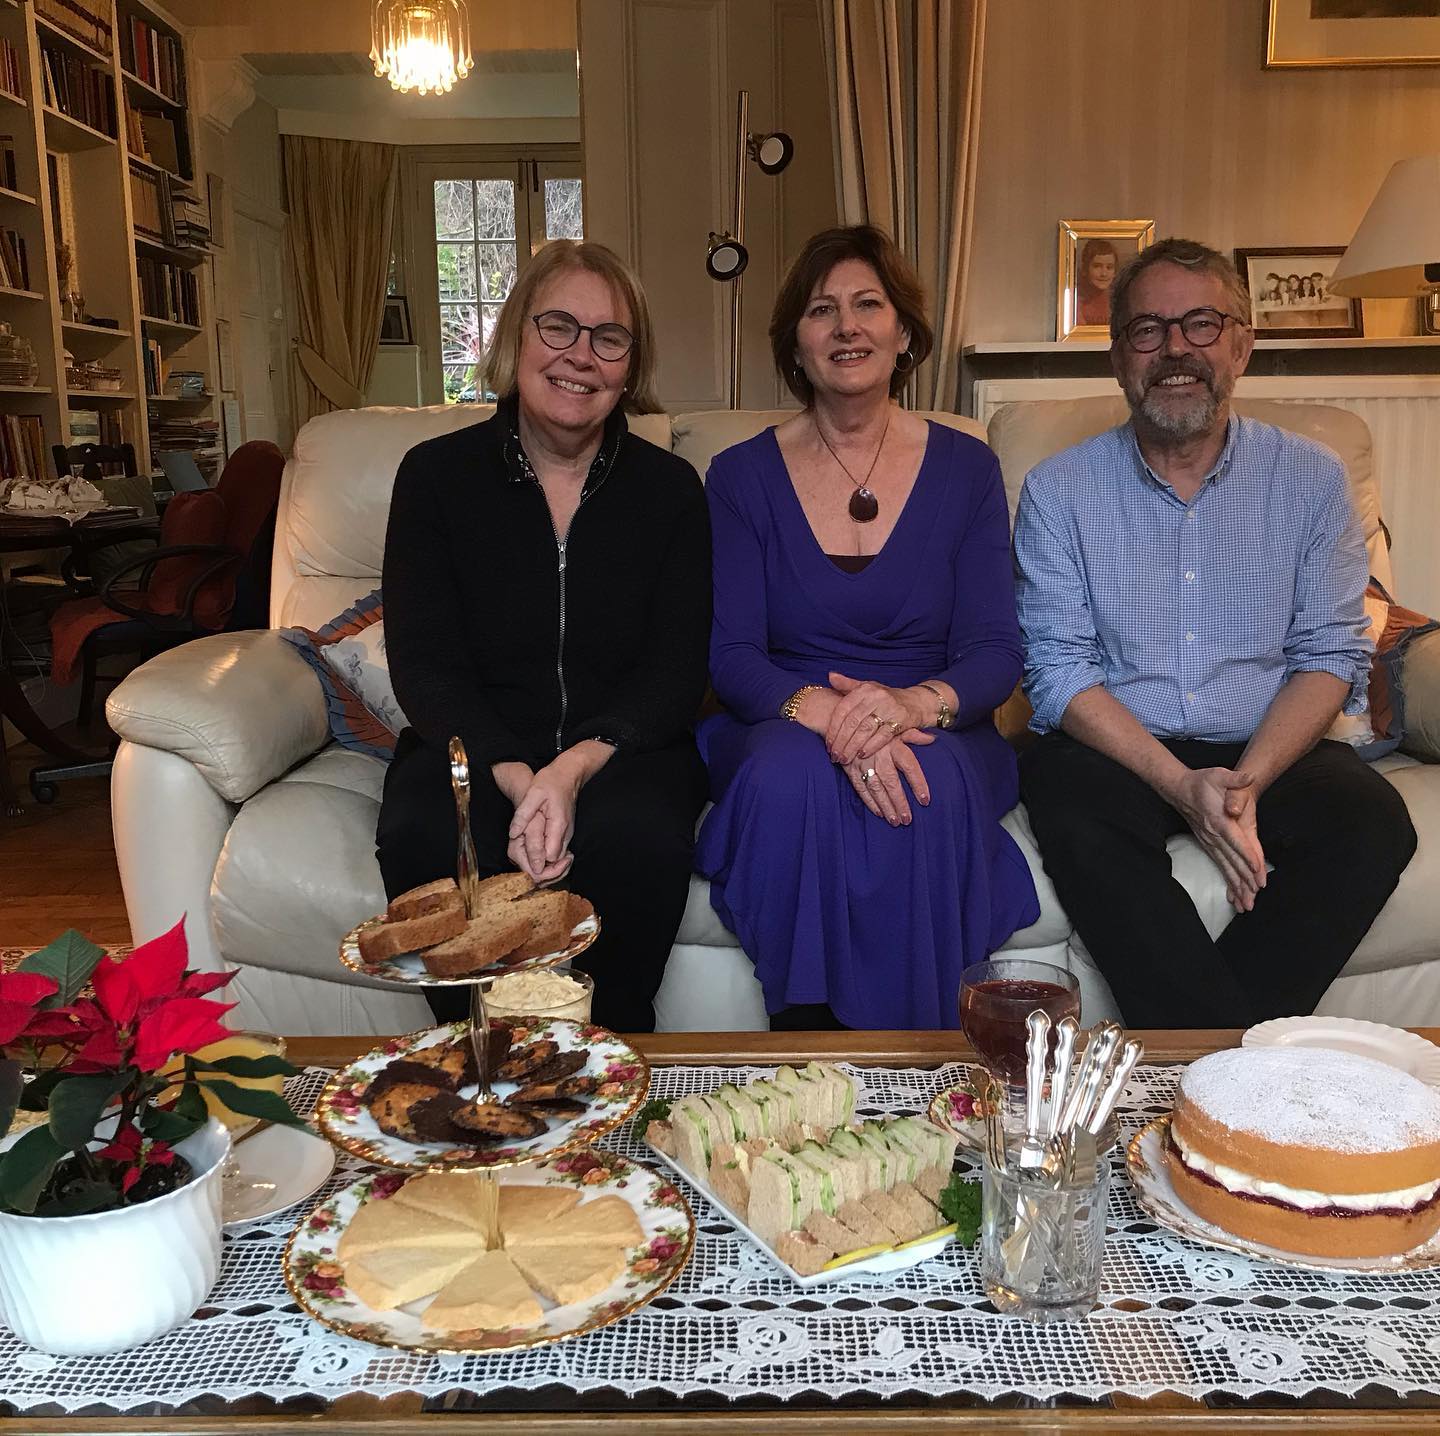 What a morning! A lesson about how to make a proper afternoon tea at wonderful mrs Giuliana Orme’s place. She’s a great teacher and a lovely host. #enturistilondon #afternoontealesson